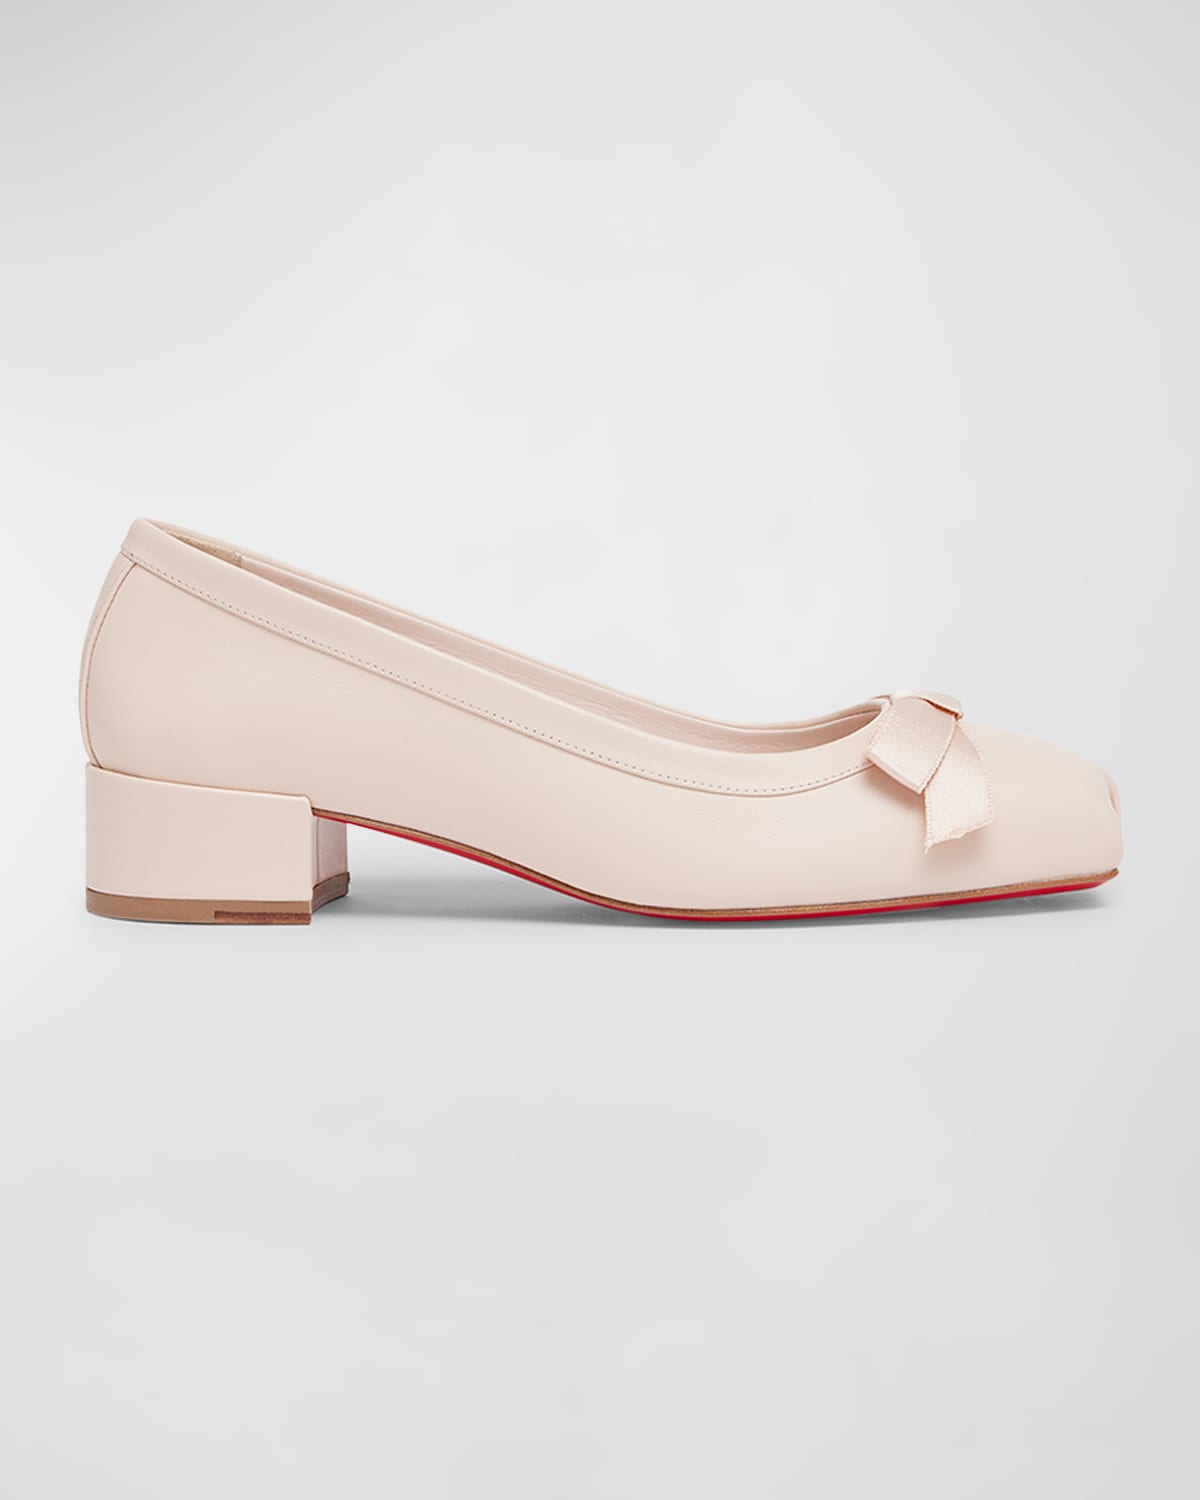 Shop Christian Louboutin Mamaflirt Leather Red Sole Ballerina Pumps In Leche